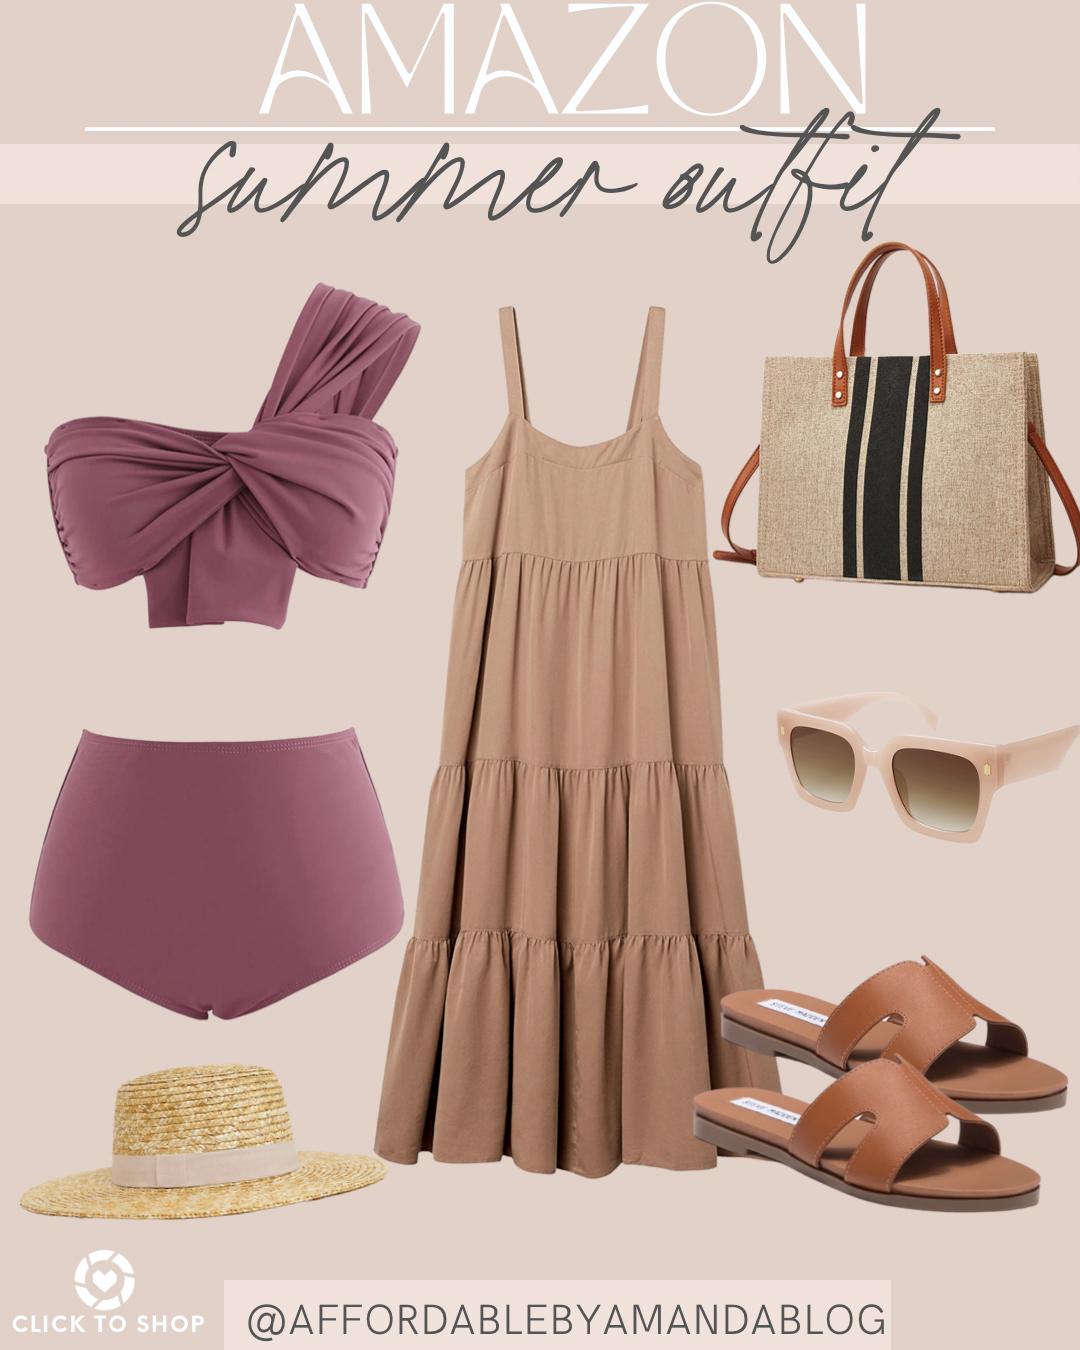 Purple swimsuit, tan tiered maxi dress, tan sandals, beach vacation outfit from Amazon. 